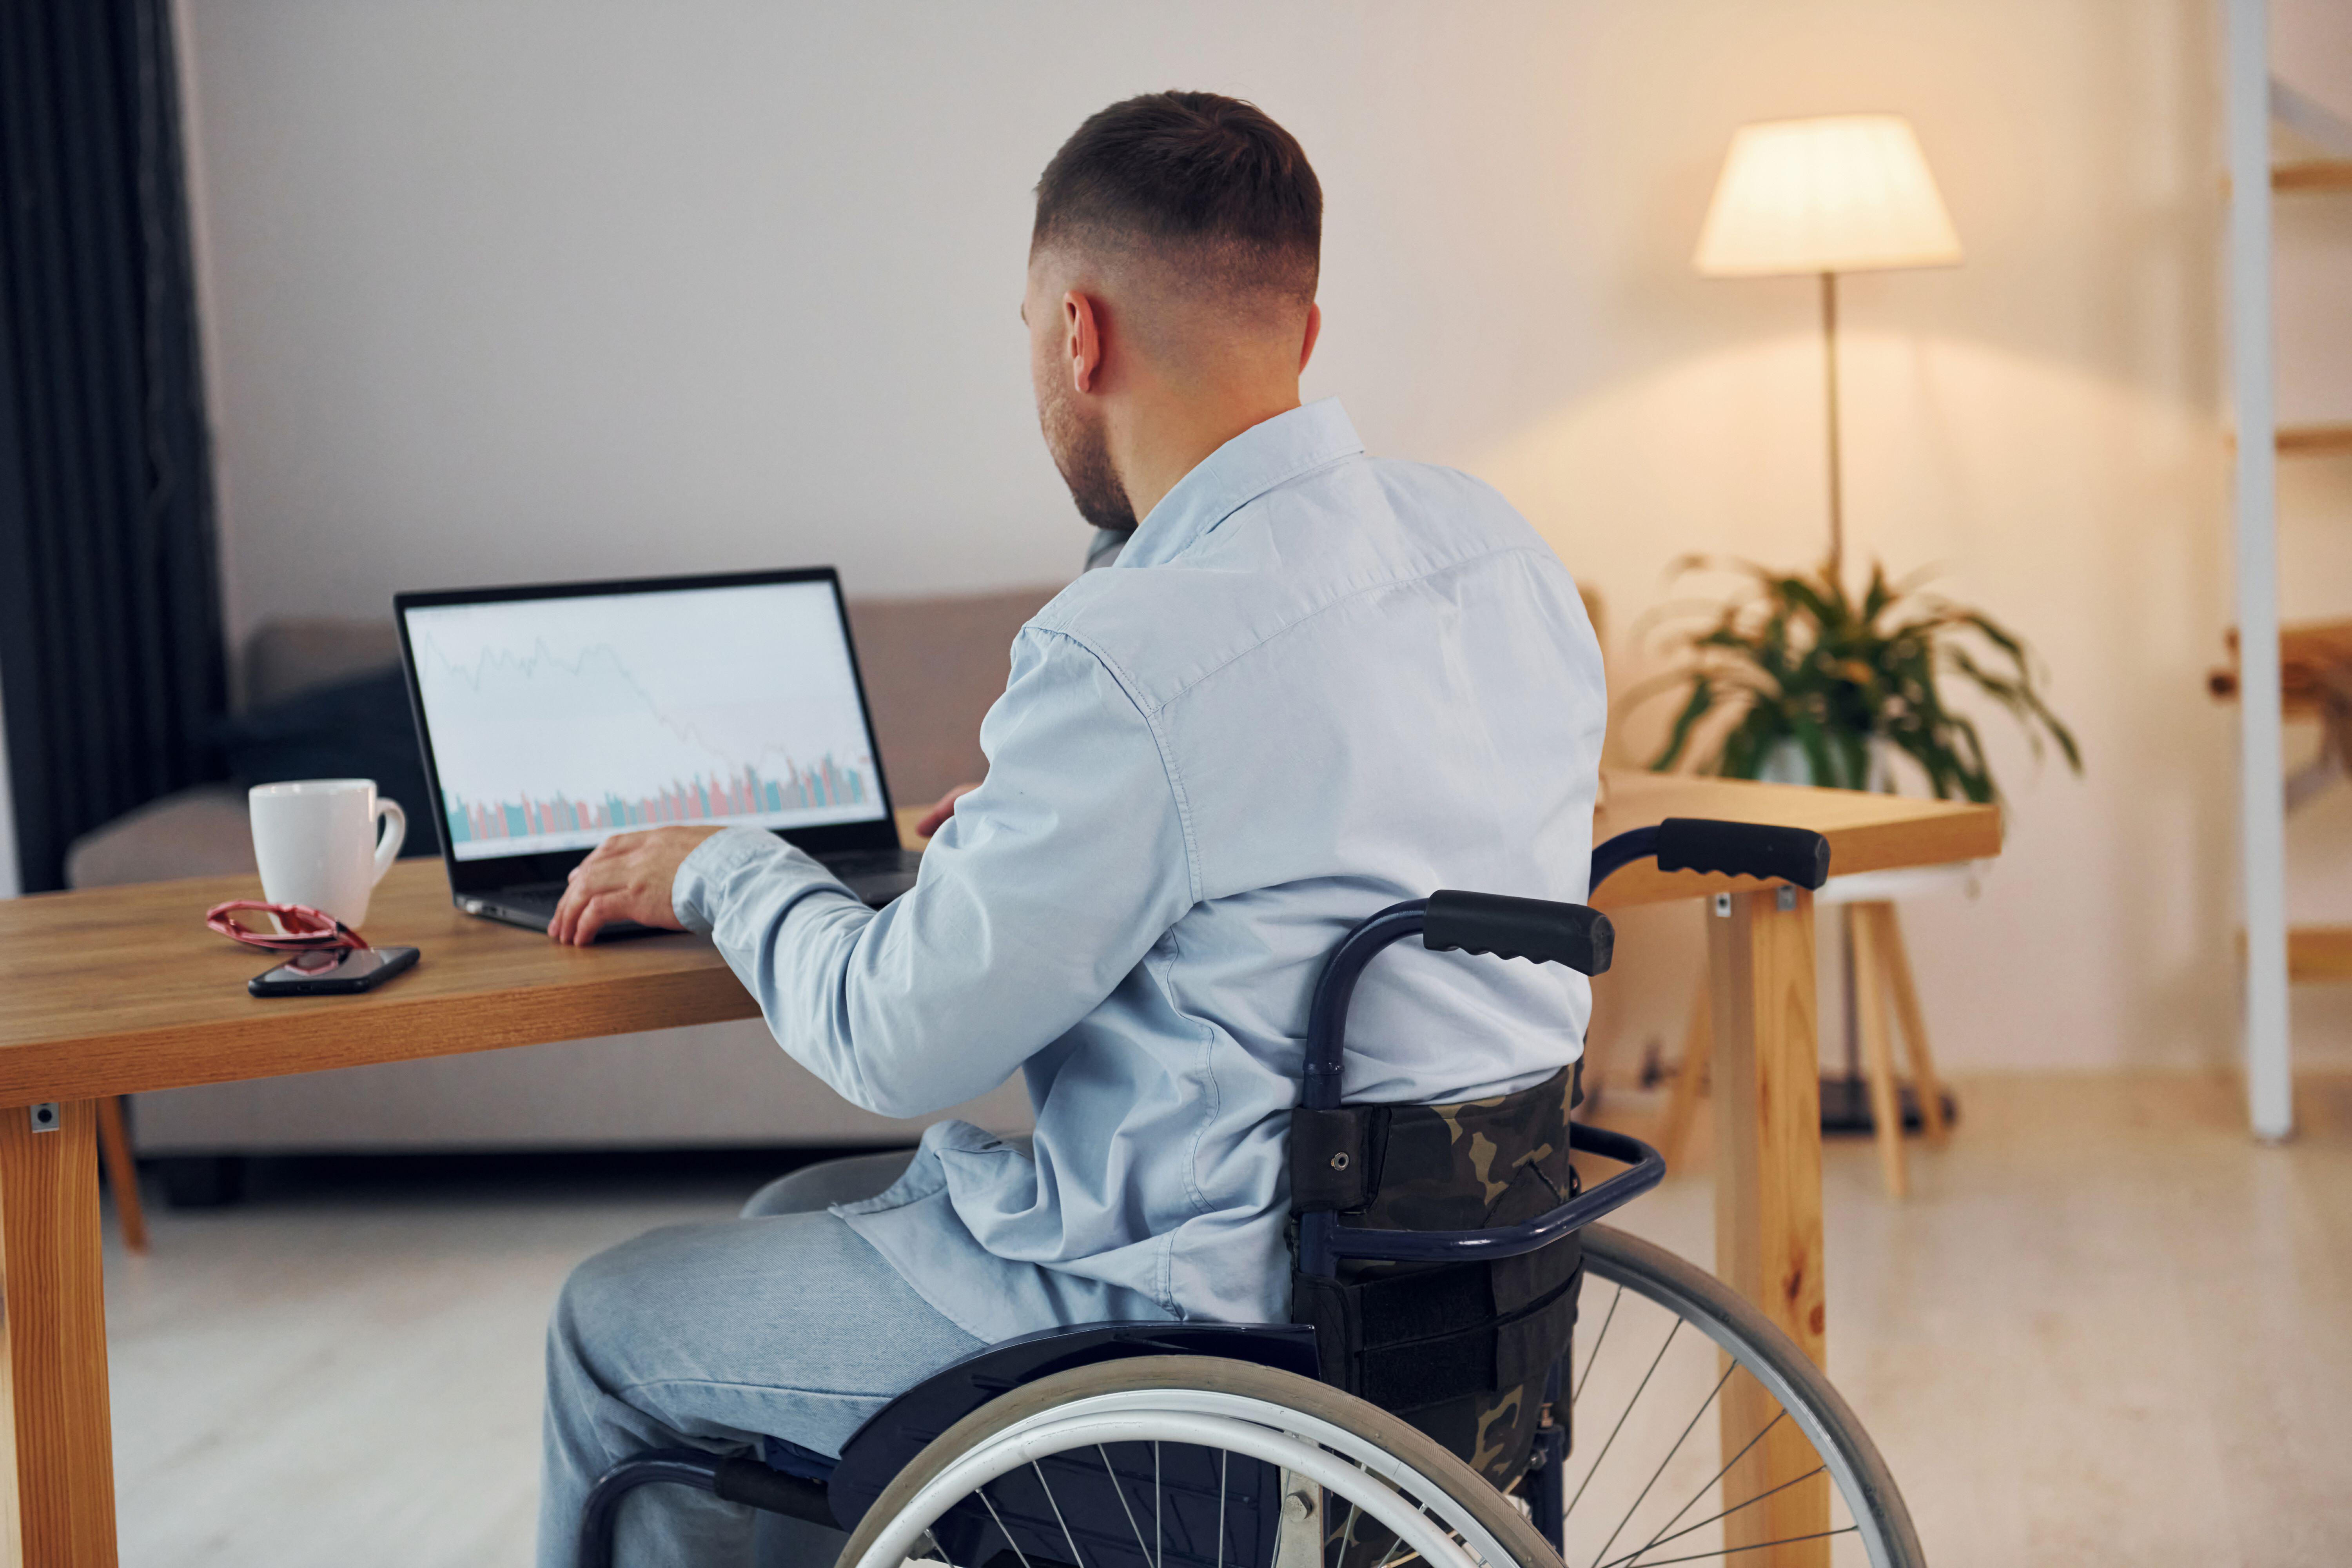 Home-working options are not always available and not suitable for everyone, a disability charity said (Alamy/PA)